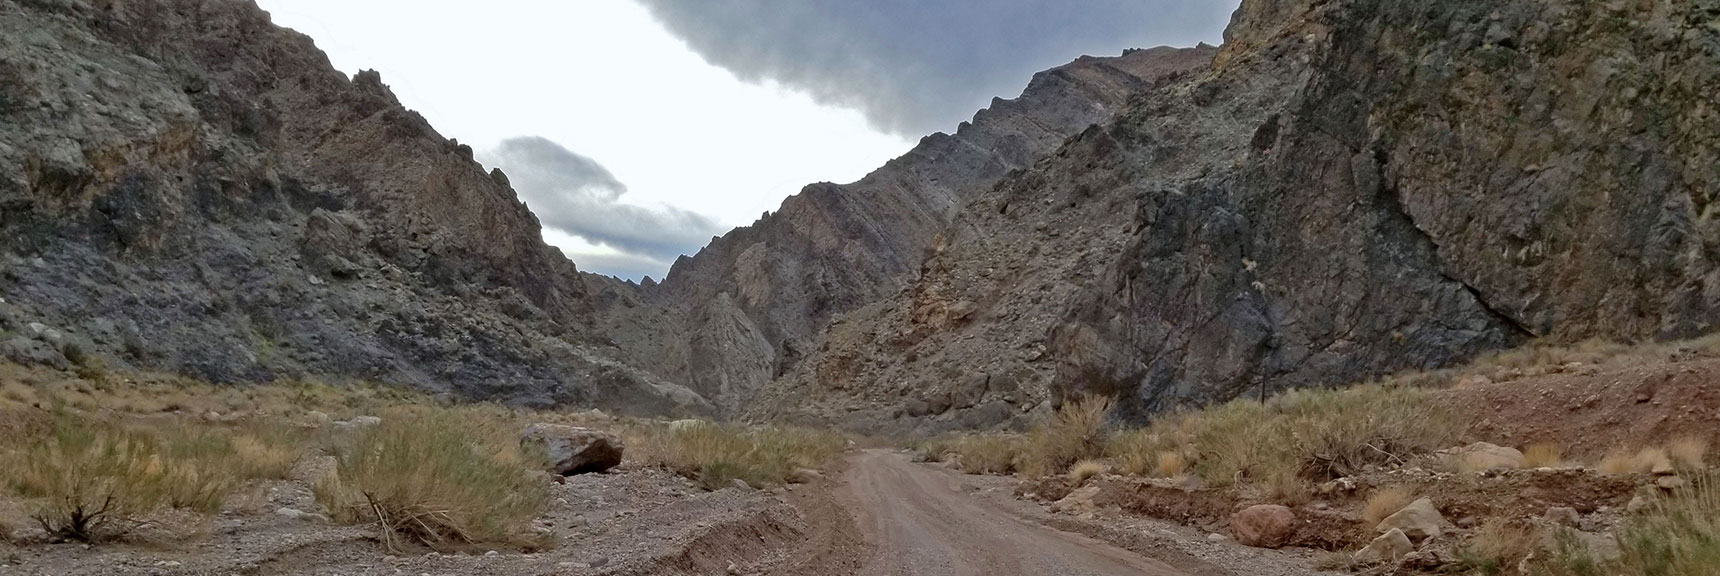 Titus Canyon Below Leadfield Alternately Widen and Narrows. | Titus Canyon Grand Loop by Mountain Bike | Death Valley National Park, California